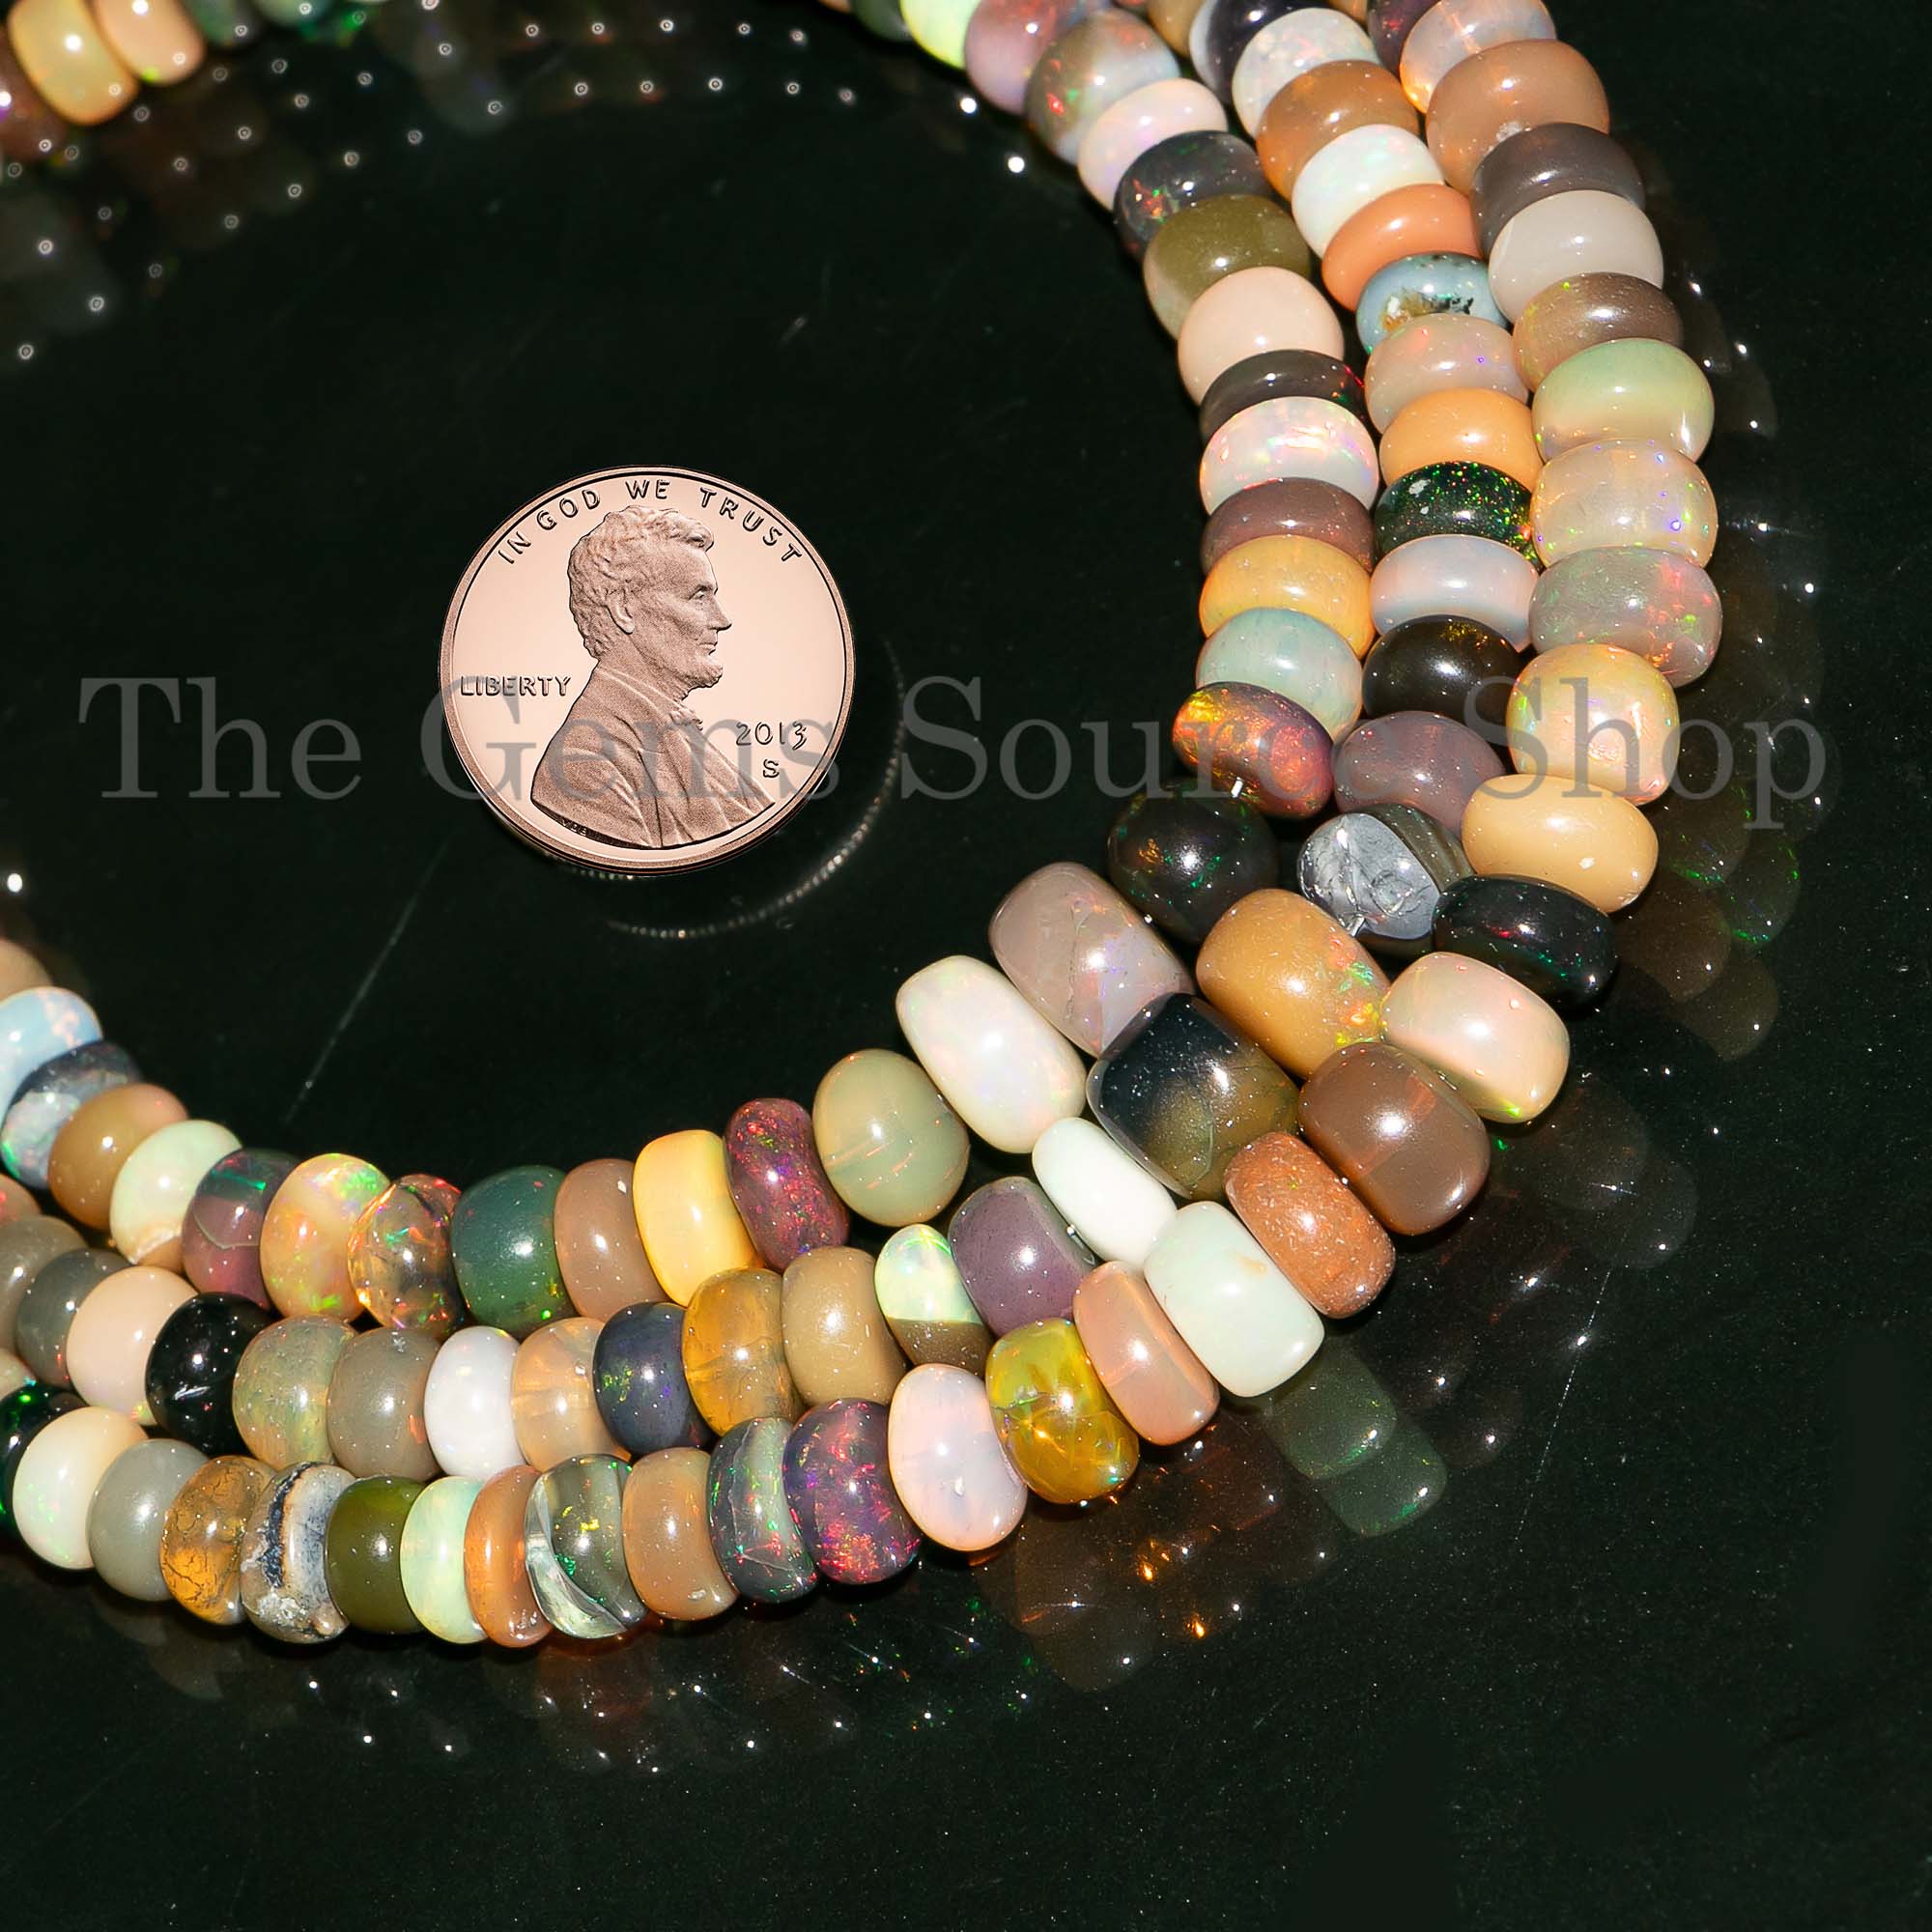 Disco Opal Smooth Rondelle, 6-8mm Disco Opal Plain Beads, Disco Opal Beads, Opal Smooth Rondelle, Opal Rondelle Beads